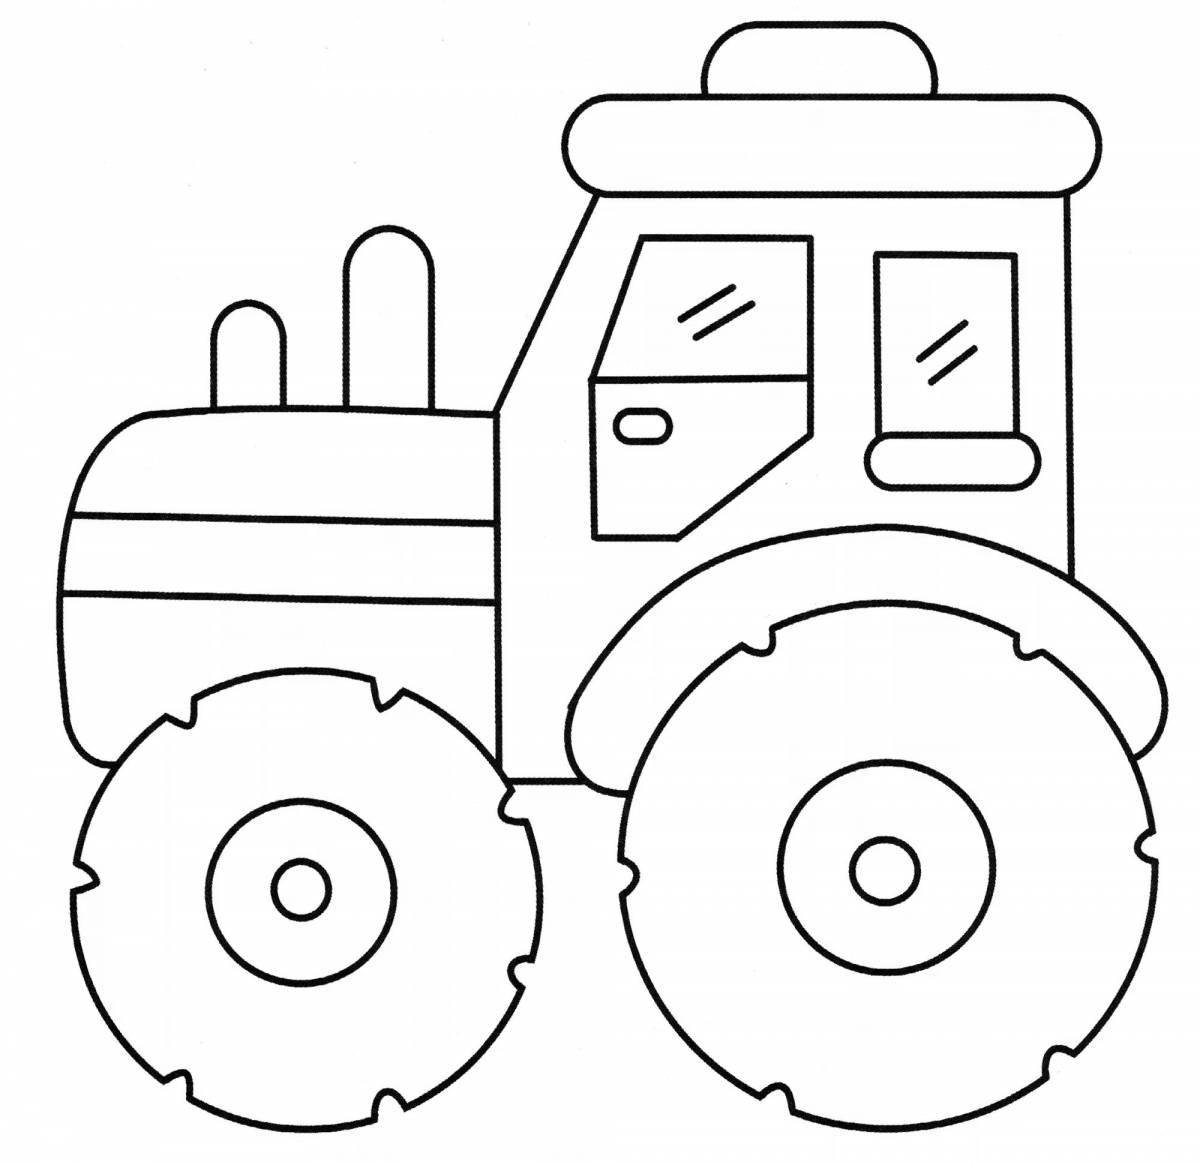 Shiny kids tractor coloring page